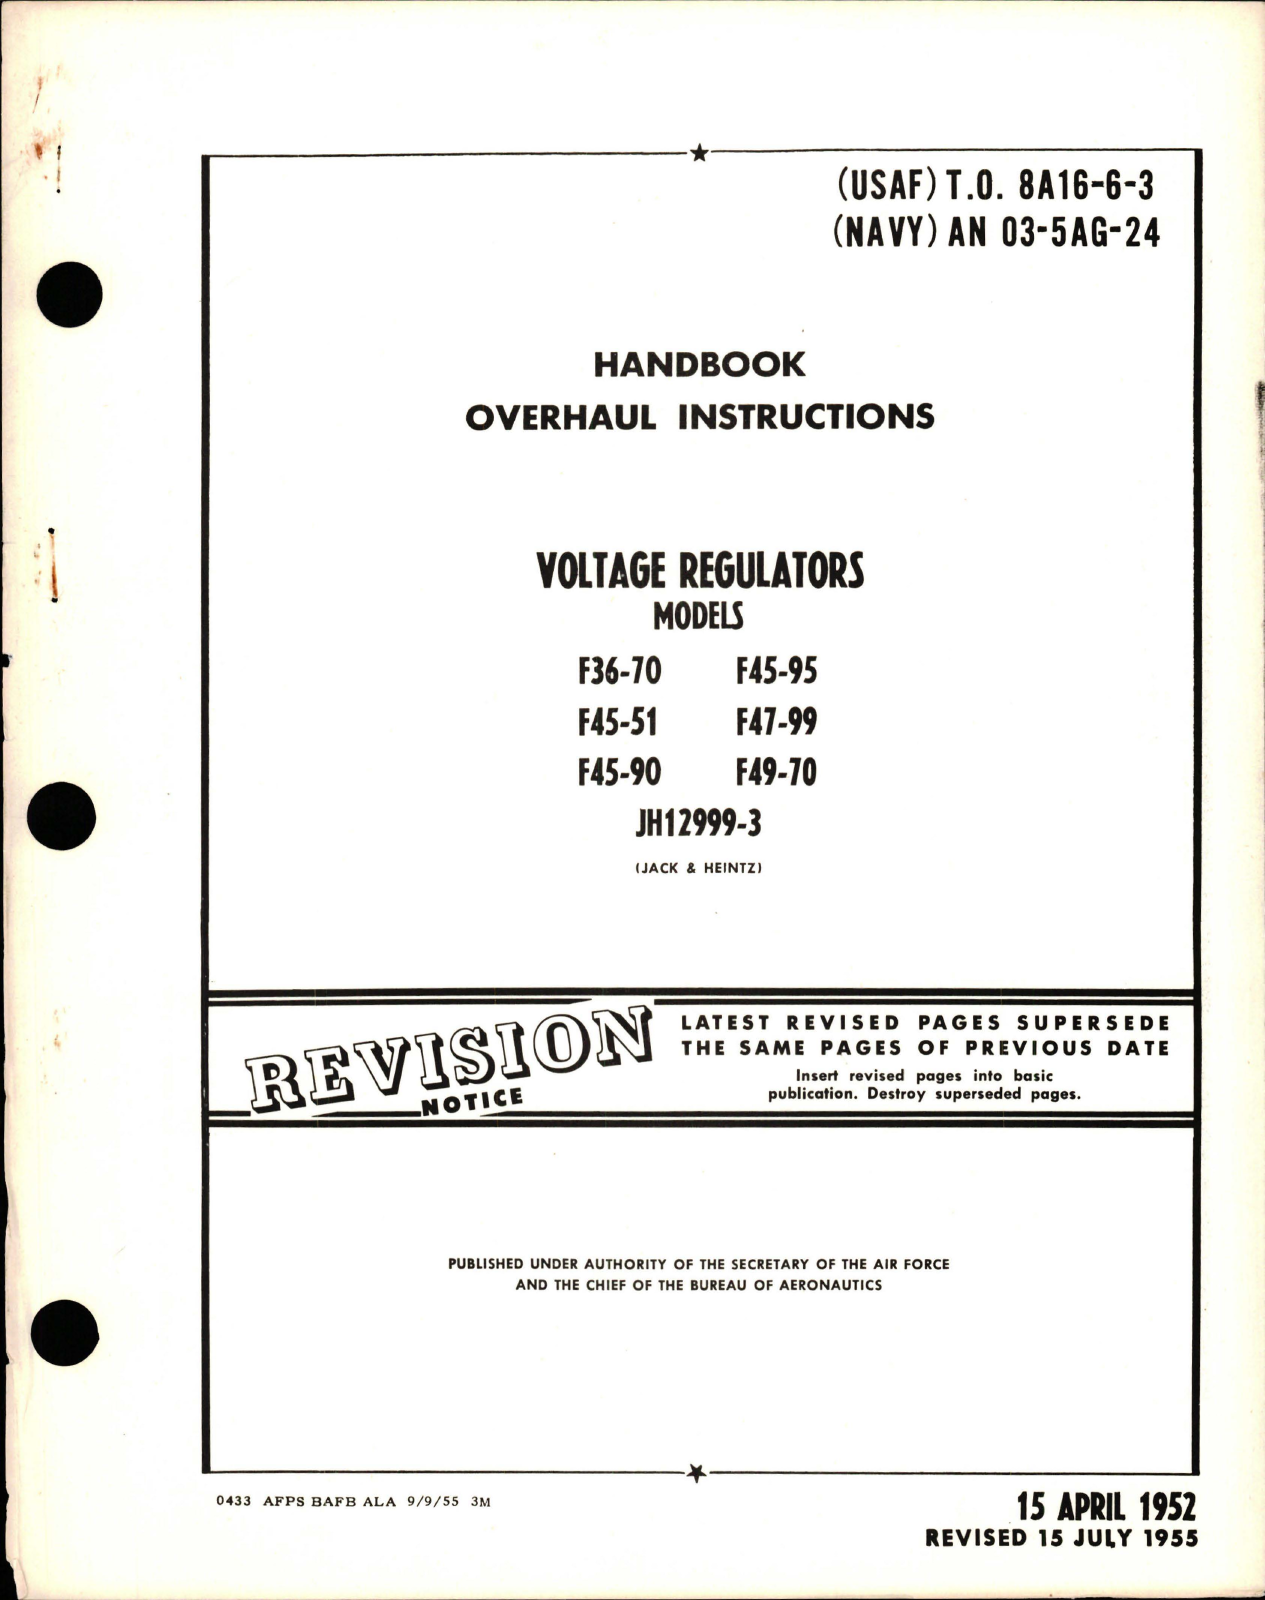 Sample page 1 from AirCorps Library document: Overhaul Instructions for Voltage Regulators - Models F36-70, F45-51, F45-90, F45-95, F47-99, F49-70, and JH12999-3 